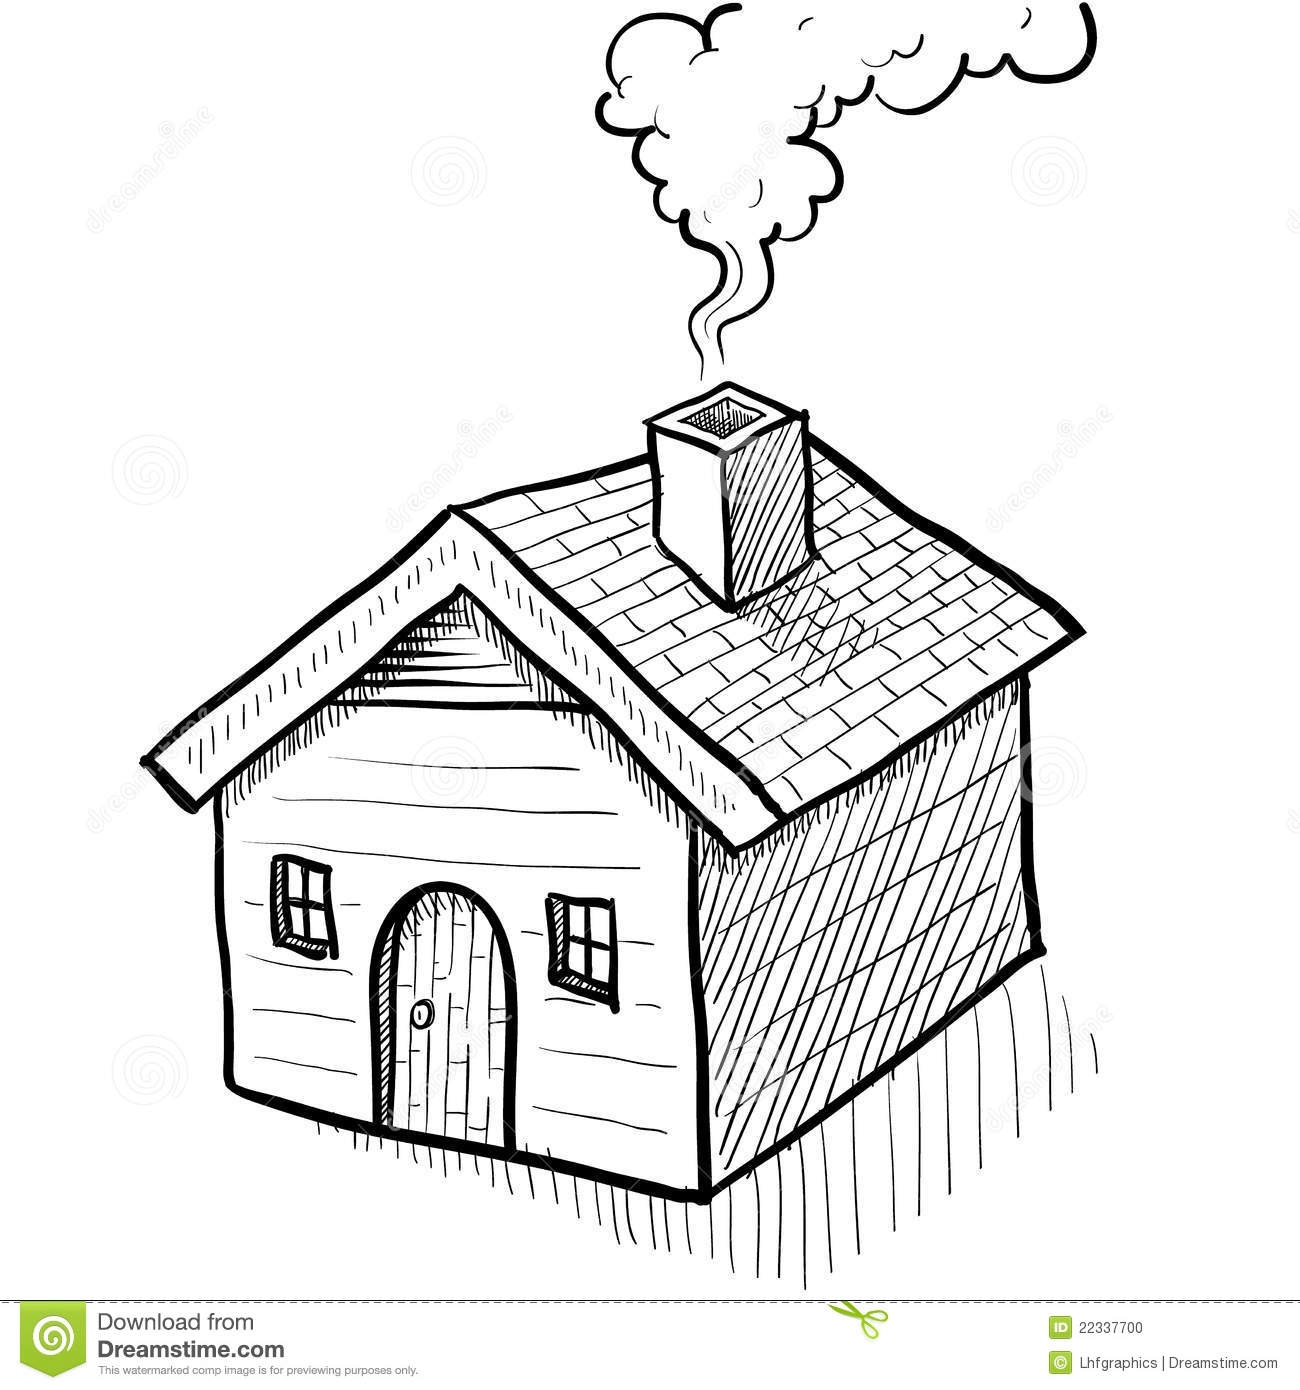 Chimney Smoke Clipart With Smoking Coming From